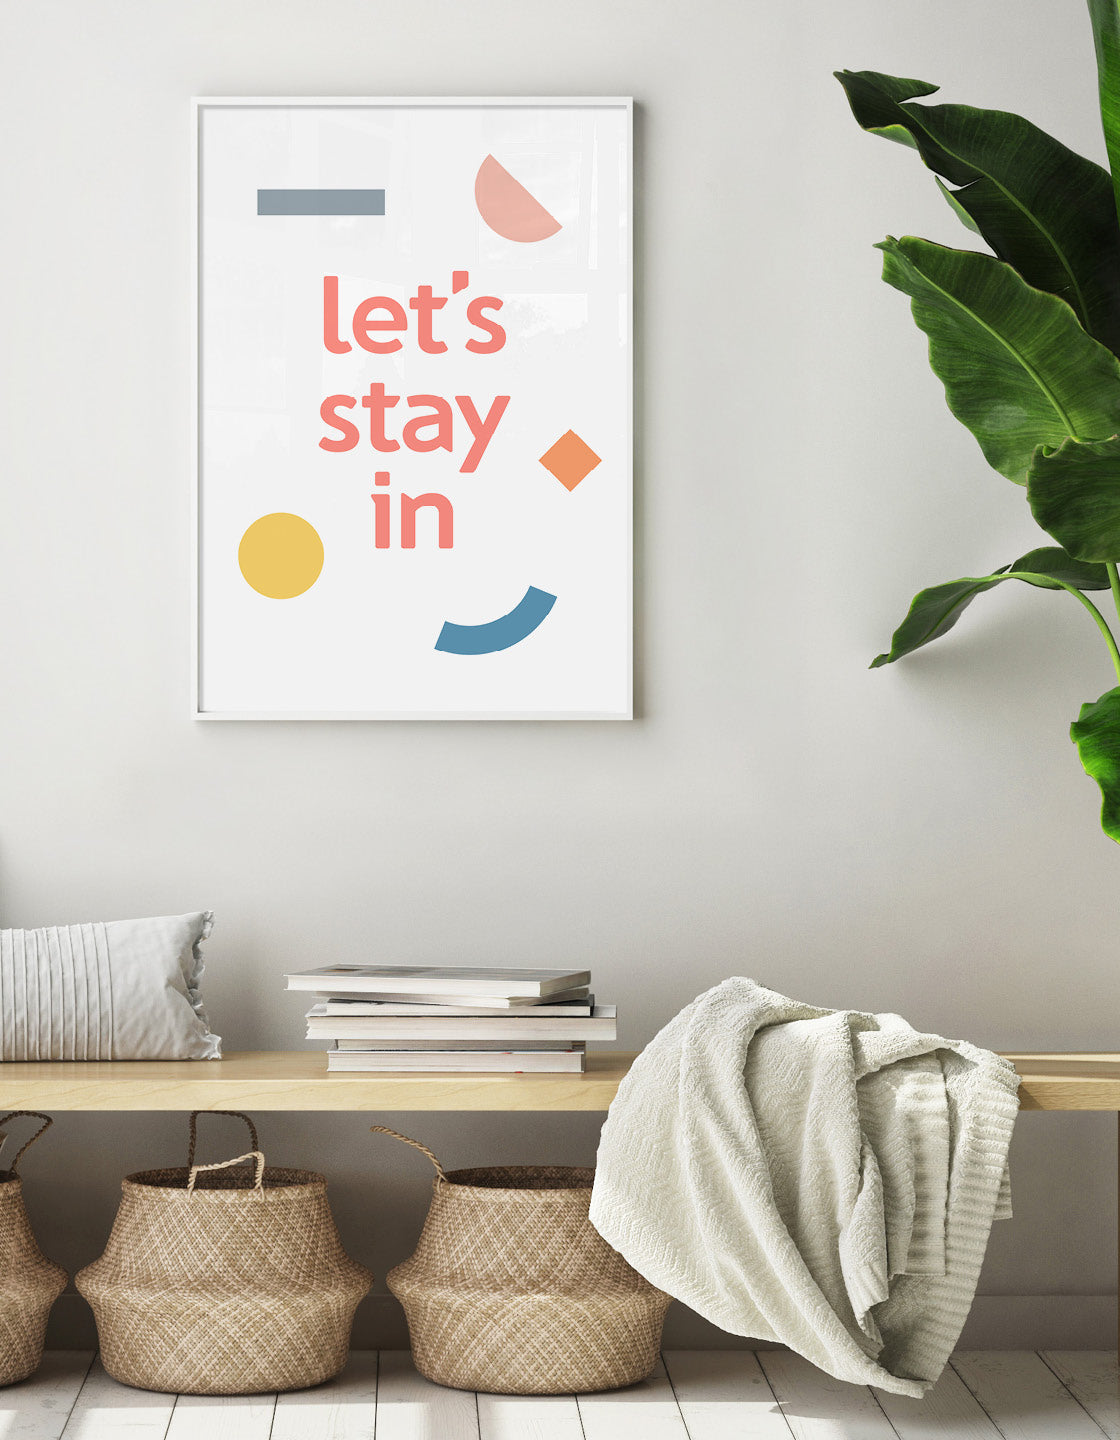 Let's stay in typography print shown on the wall above a bench with storage baskets a blanket and a palm plant